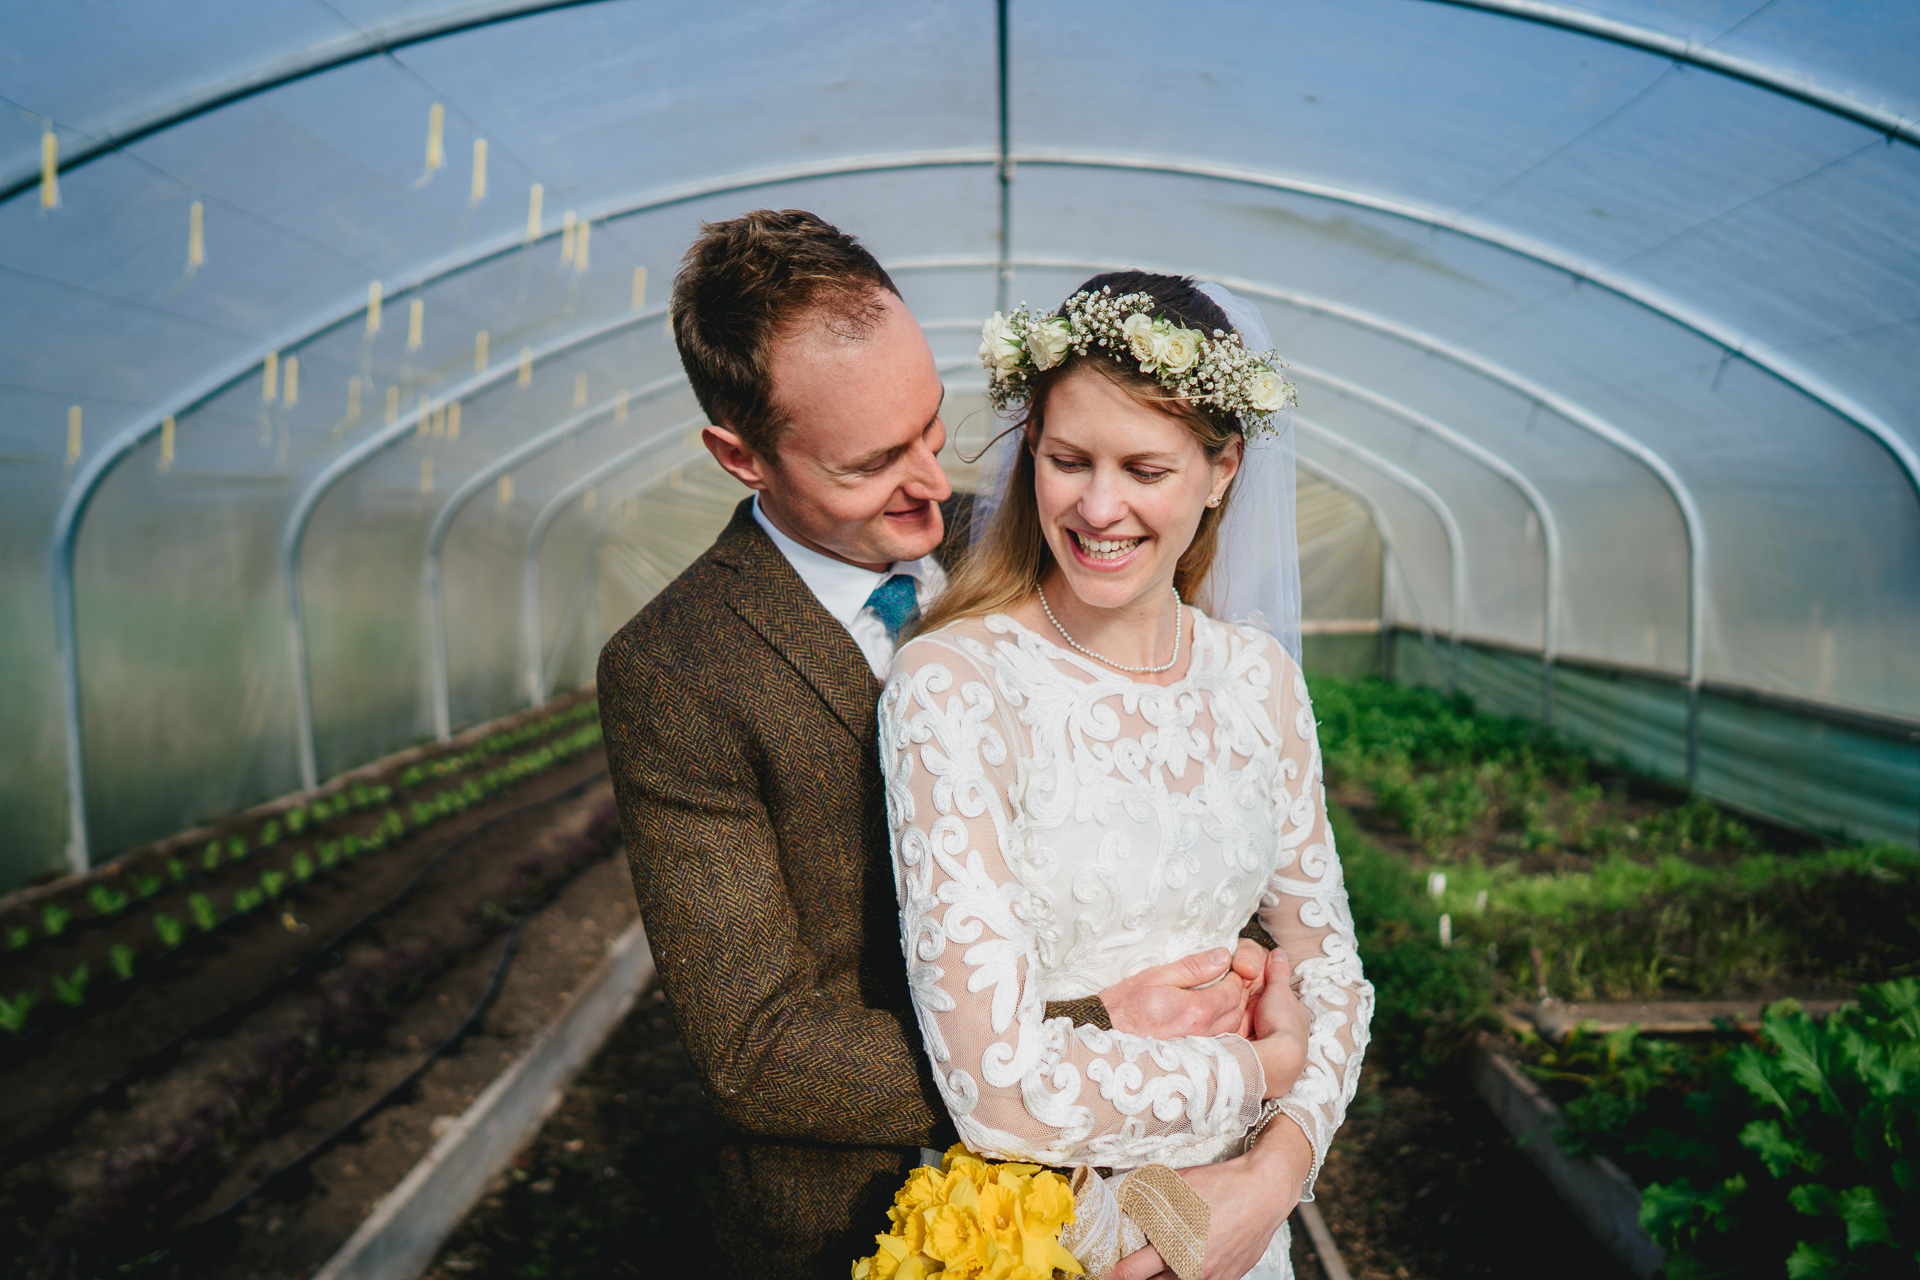 A bride and groom cuddling and smiling in a poly tunnel